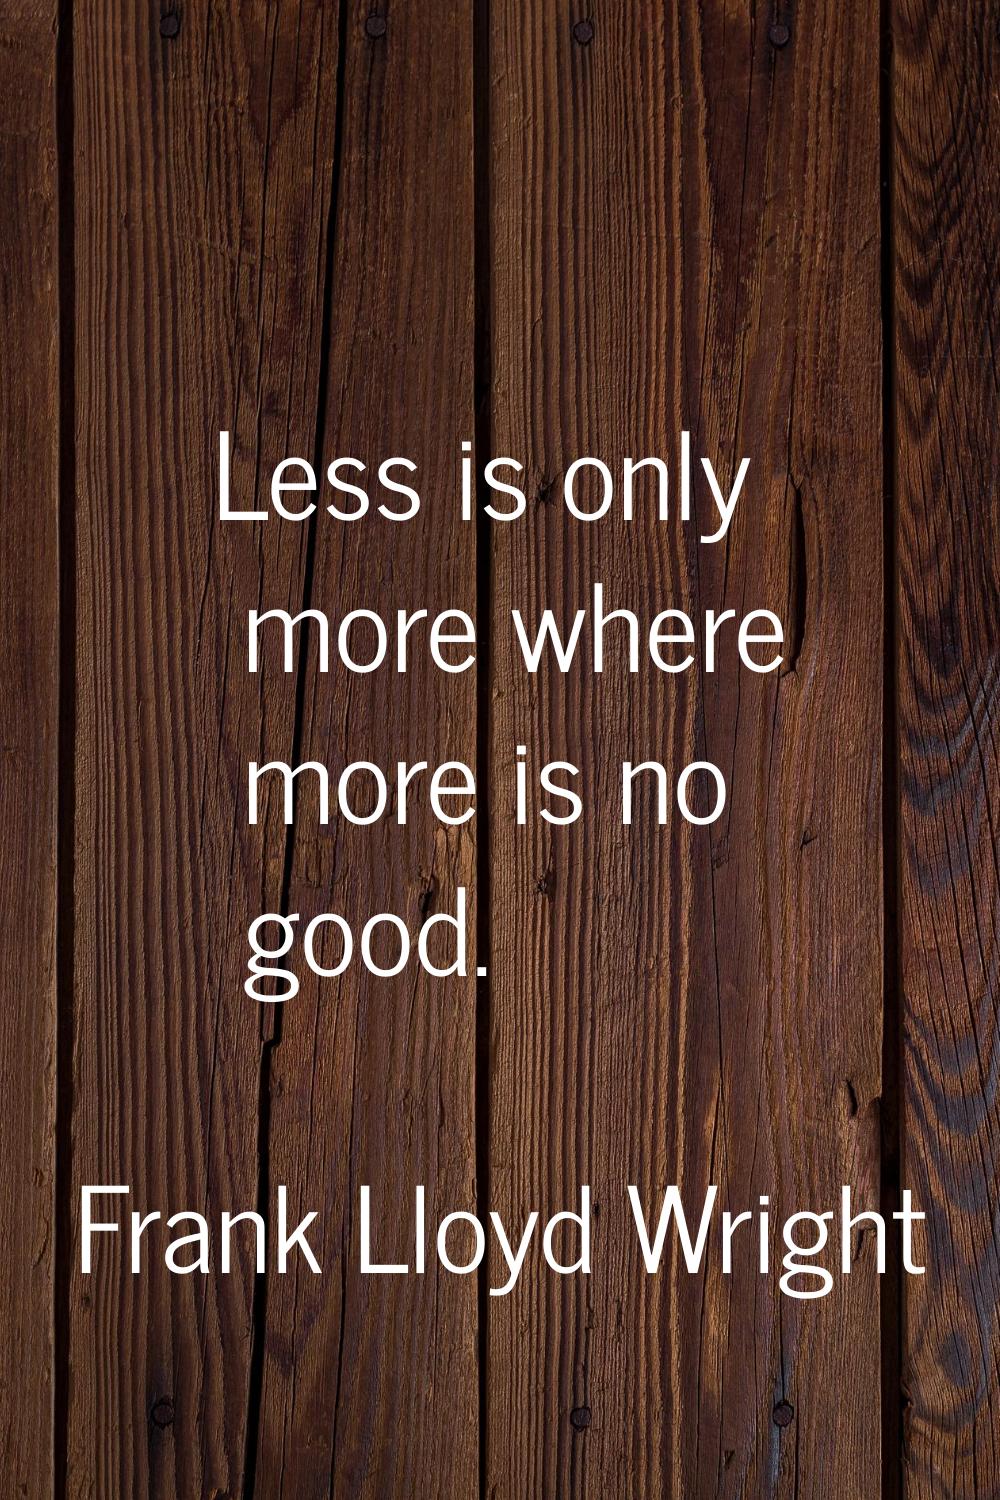 Less is only more where more is no good.